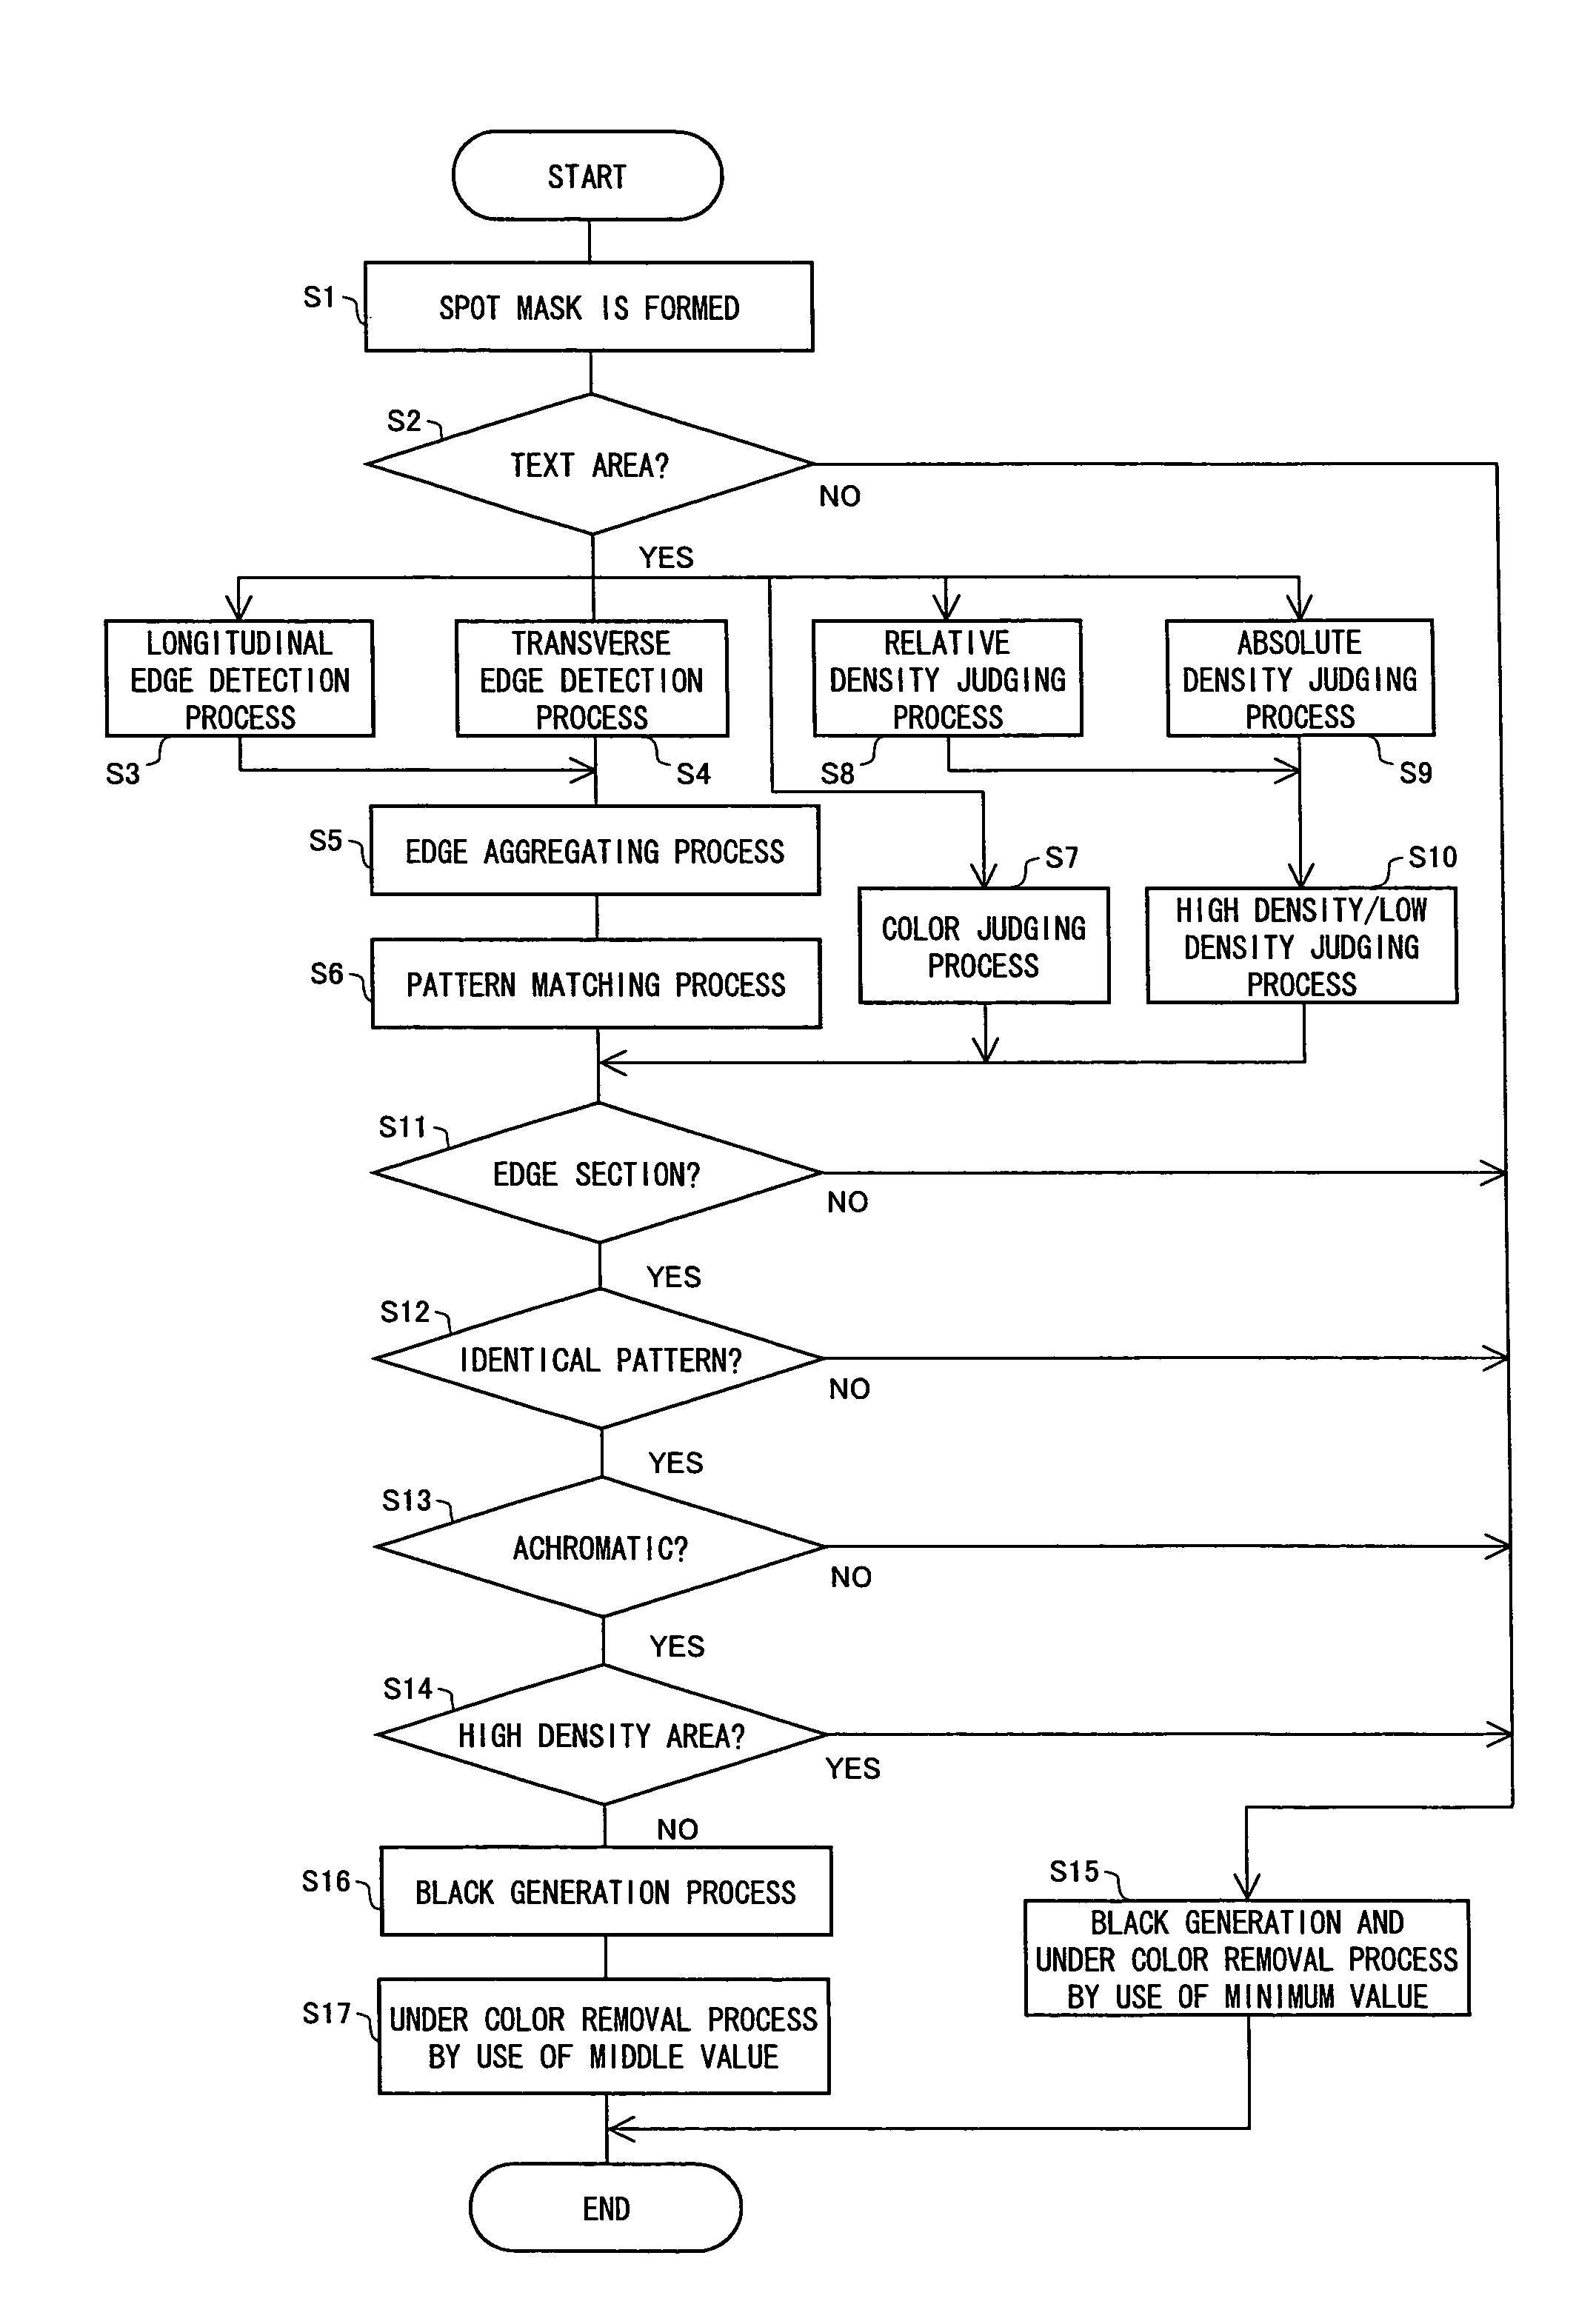 Image processing and/or forming apparatus for performing black generation and under color removal processes on selected pixels, image processing and/or forming method for the same, and computer-readable storage medium for storing program for causing computer to function as image processing and/or forming apparatus for the same